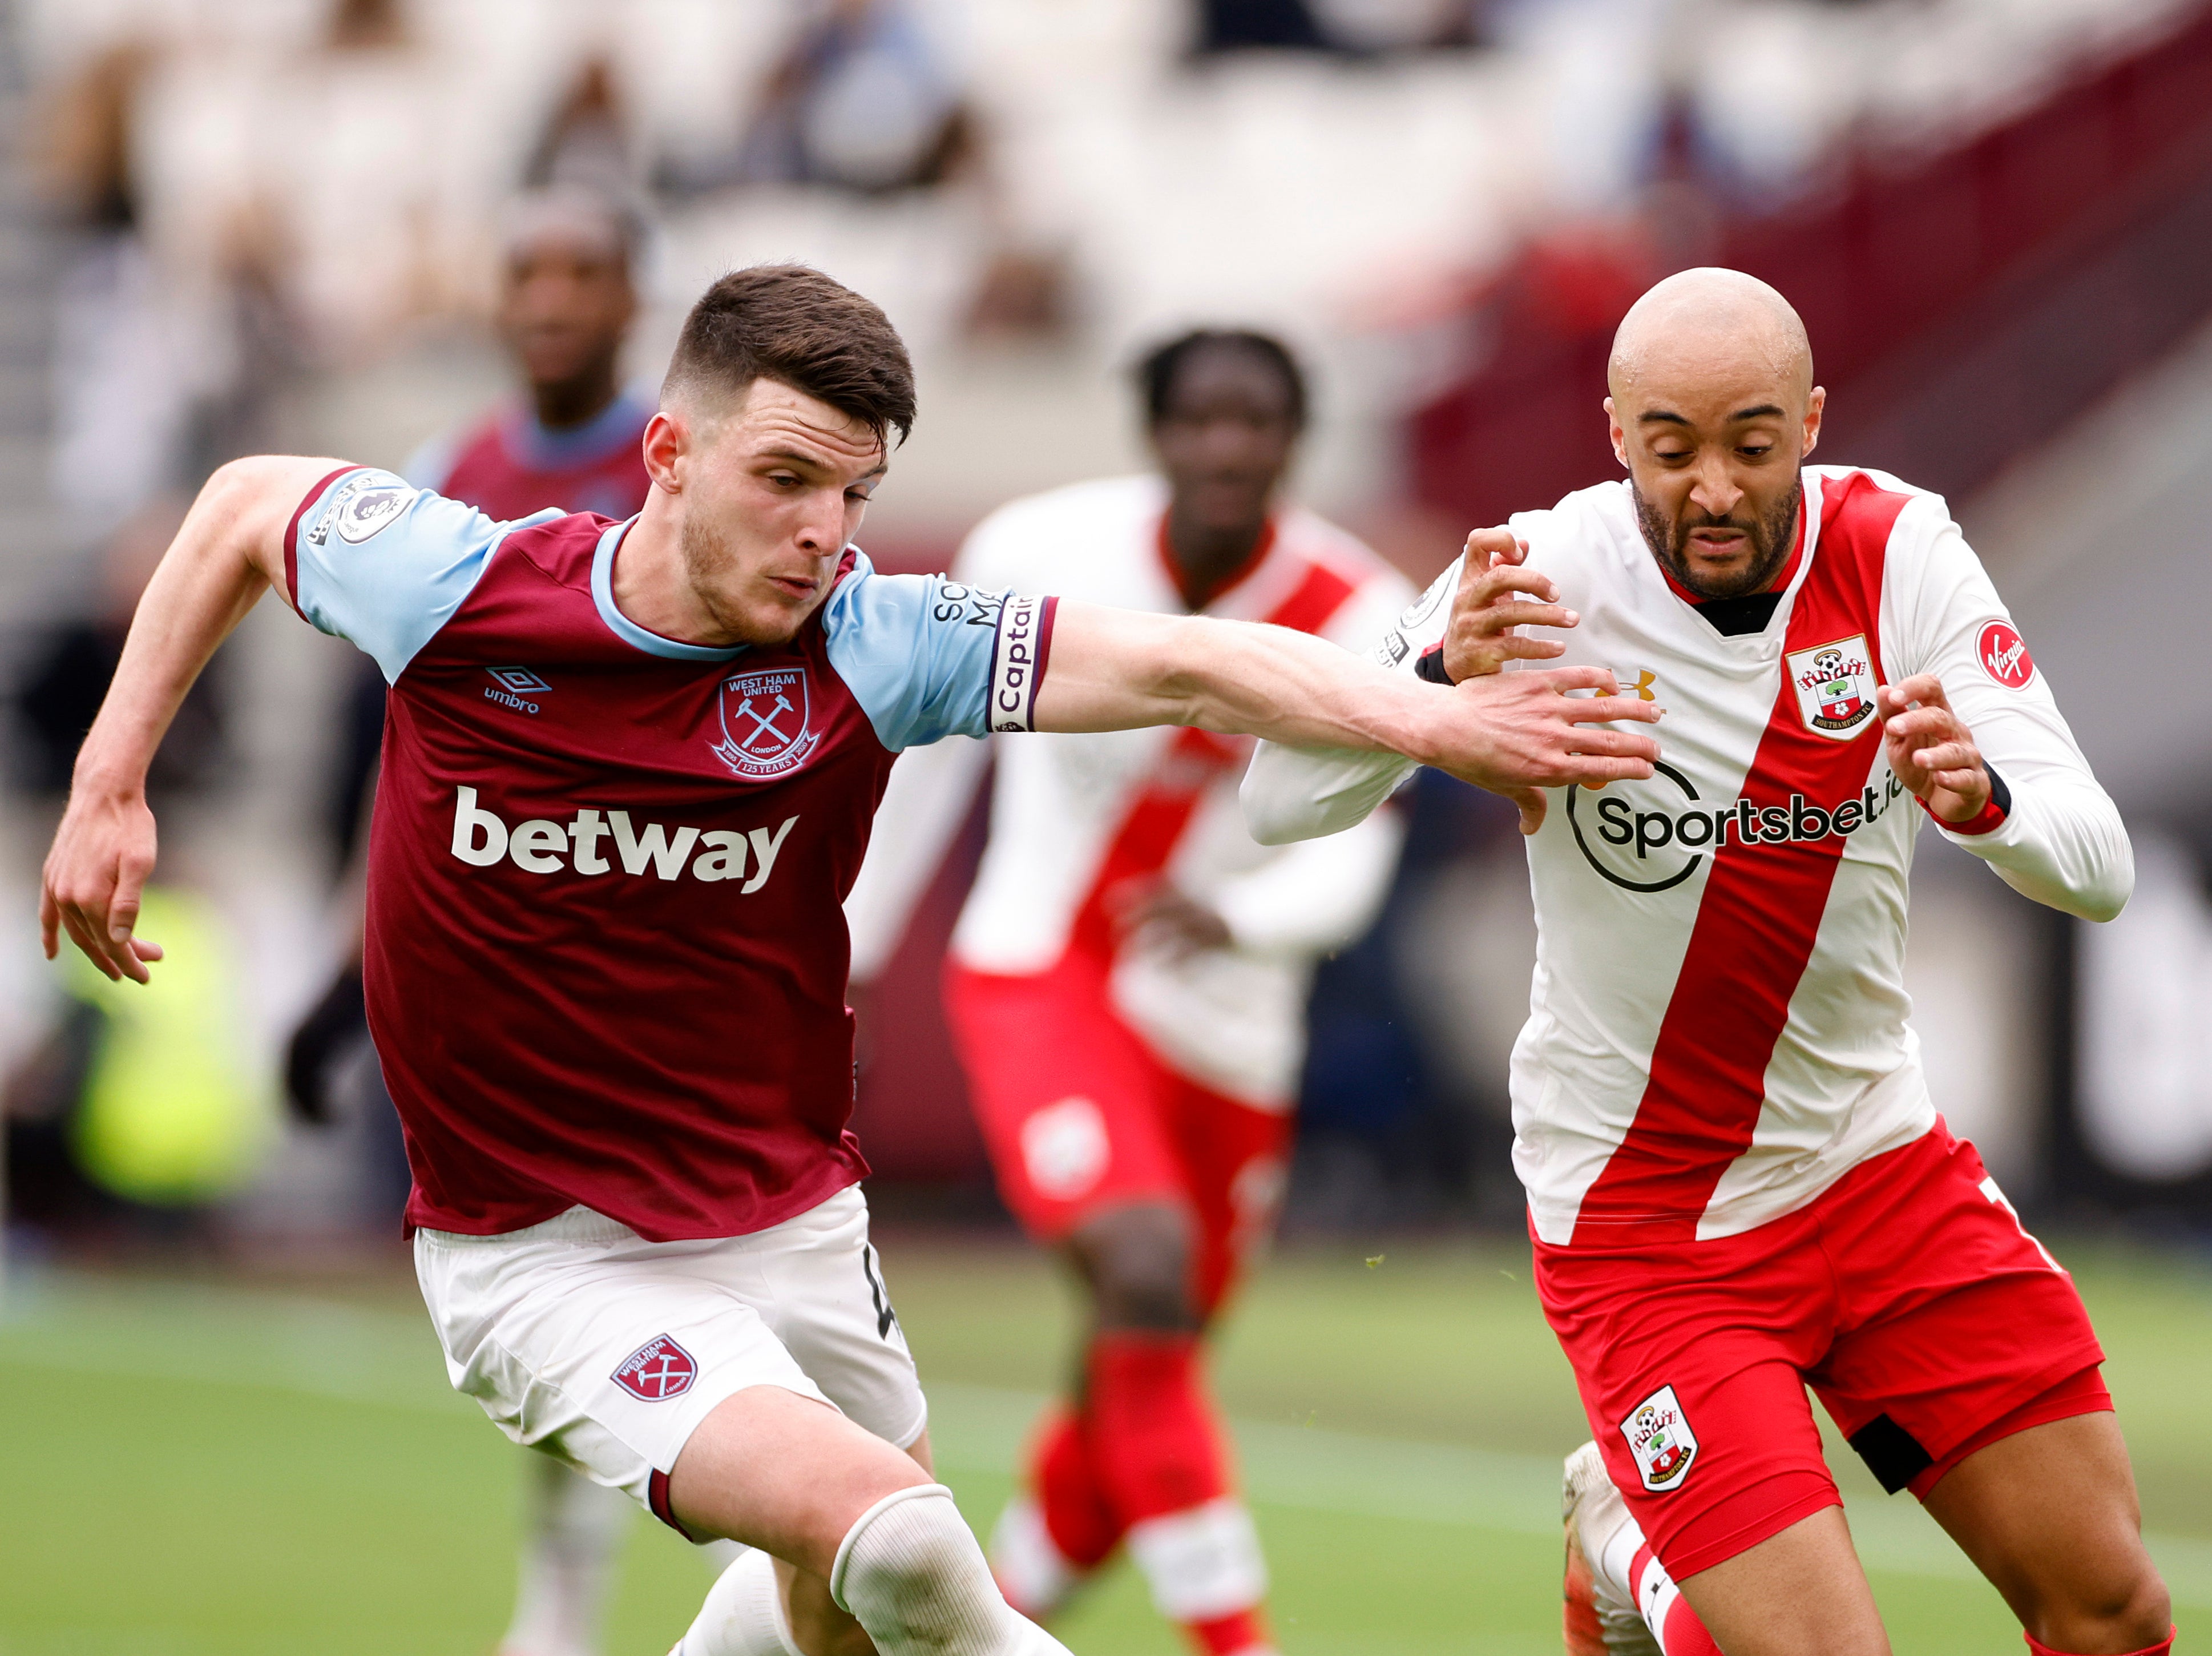 West Ham’s Declan Rice (left) vies for the ball with Southampton’s Nathan Redmond